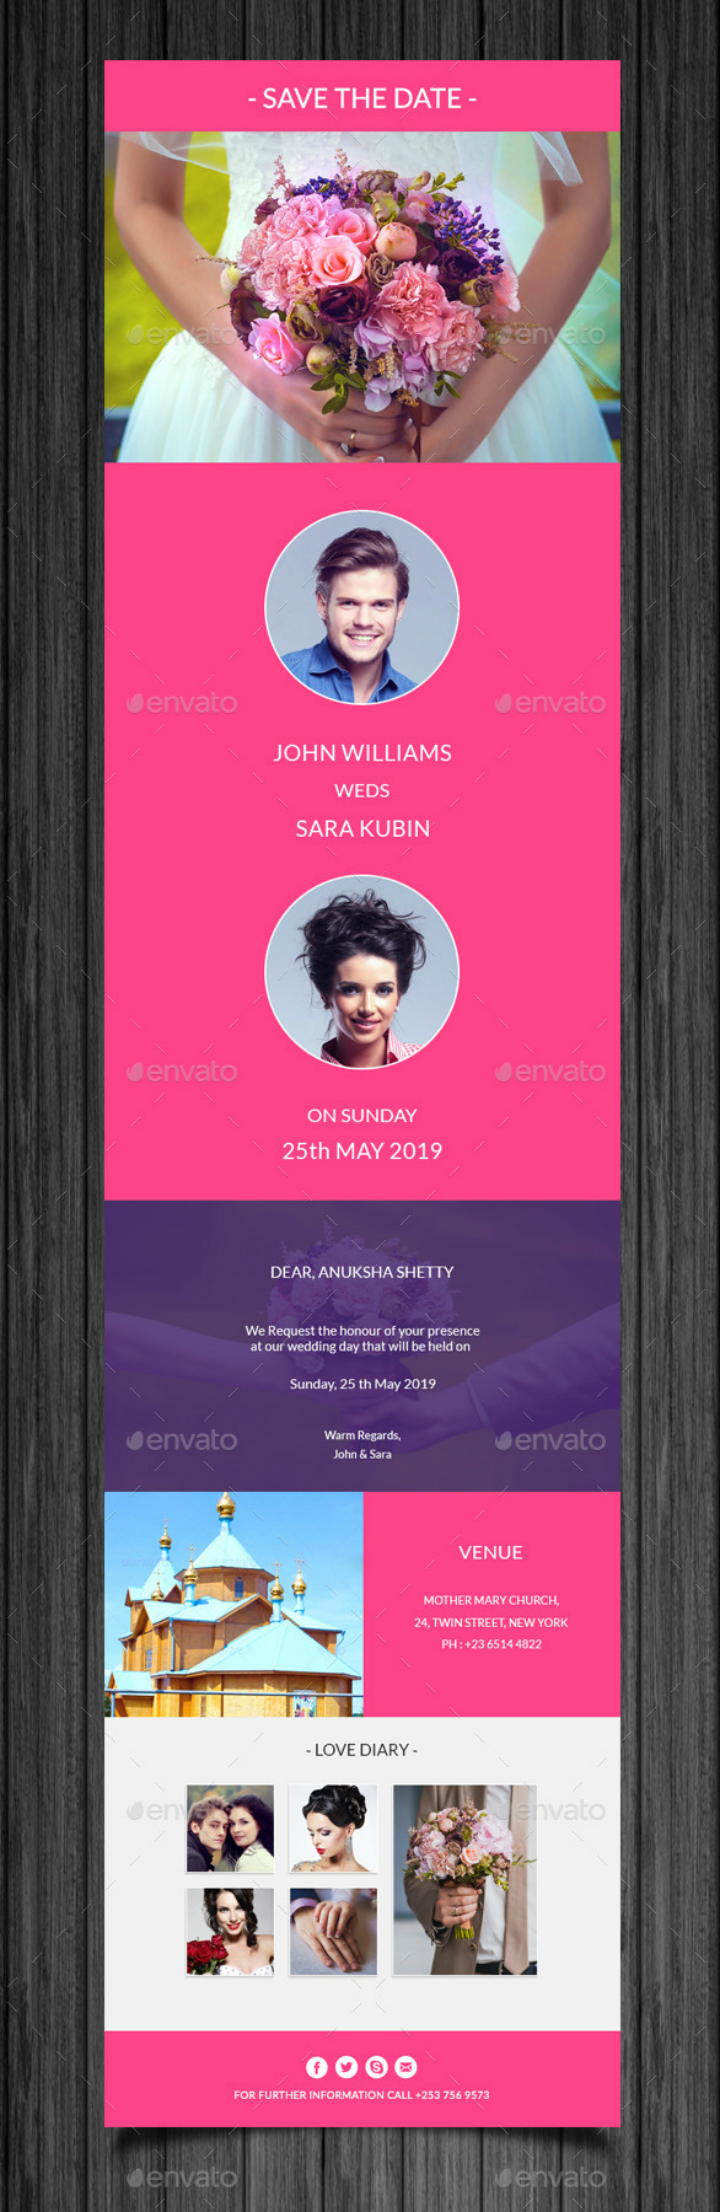 pastel-pink-wedding-invitation-email-template